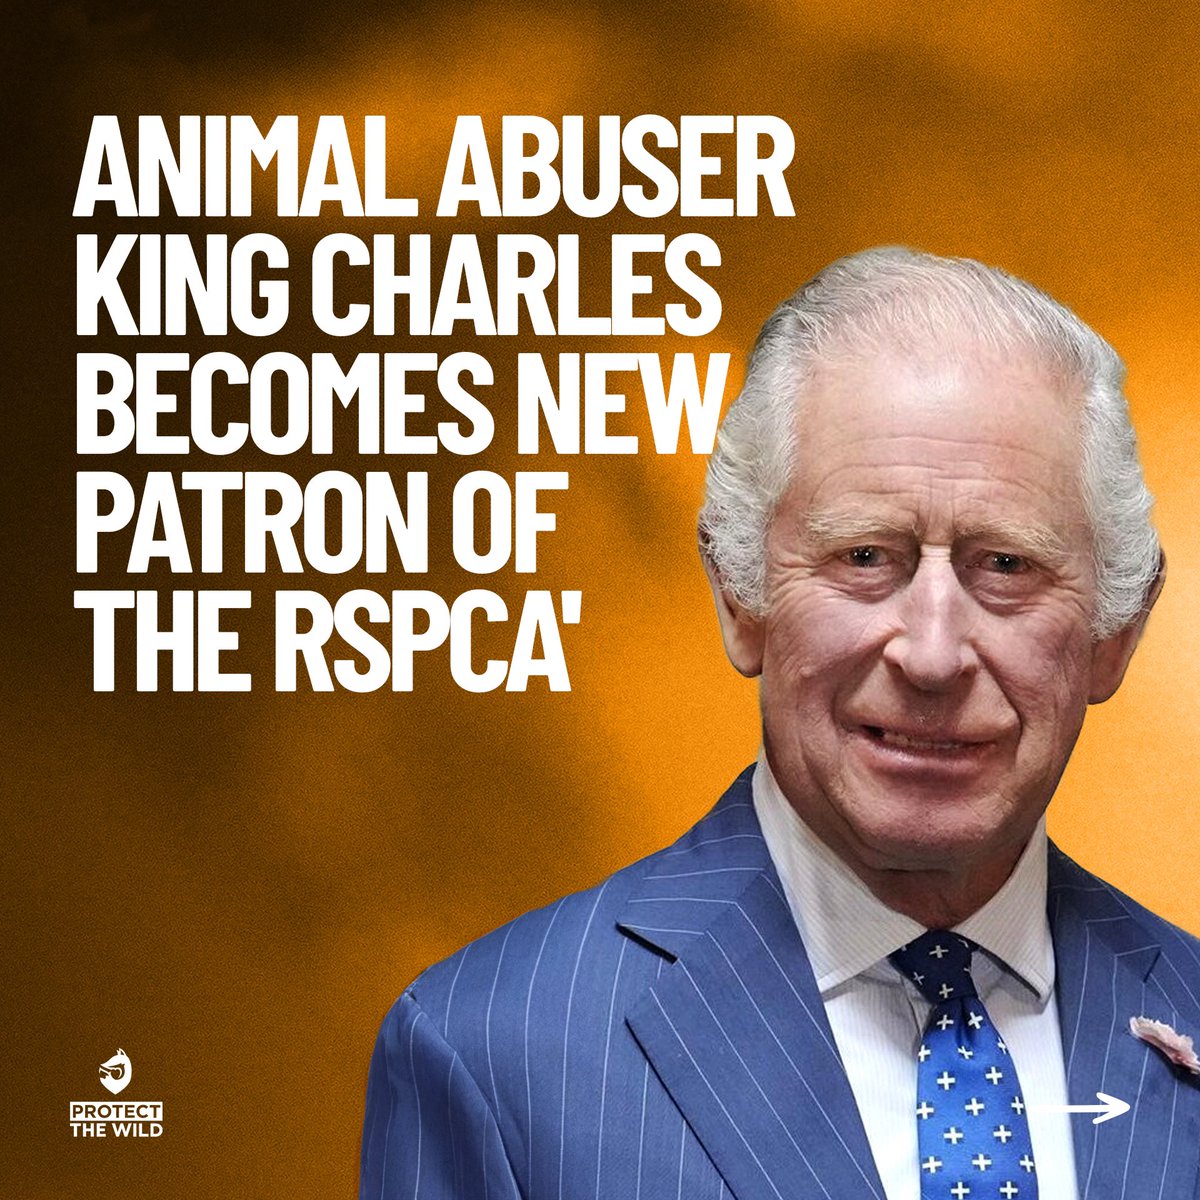 It’s quite frankly a joke that someone who described fox hunting as “romantic” has become the patron of a charity that is meant to protect animals from cruelty.